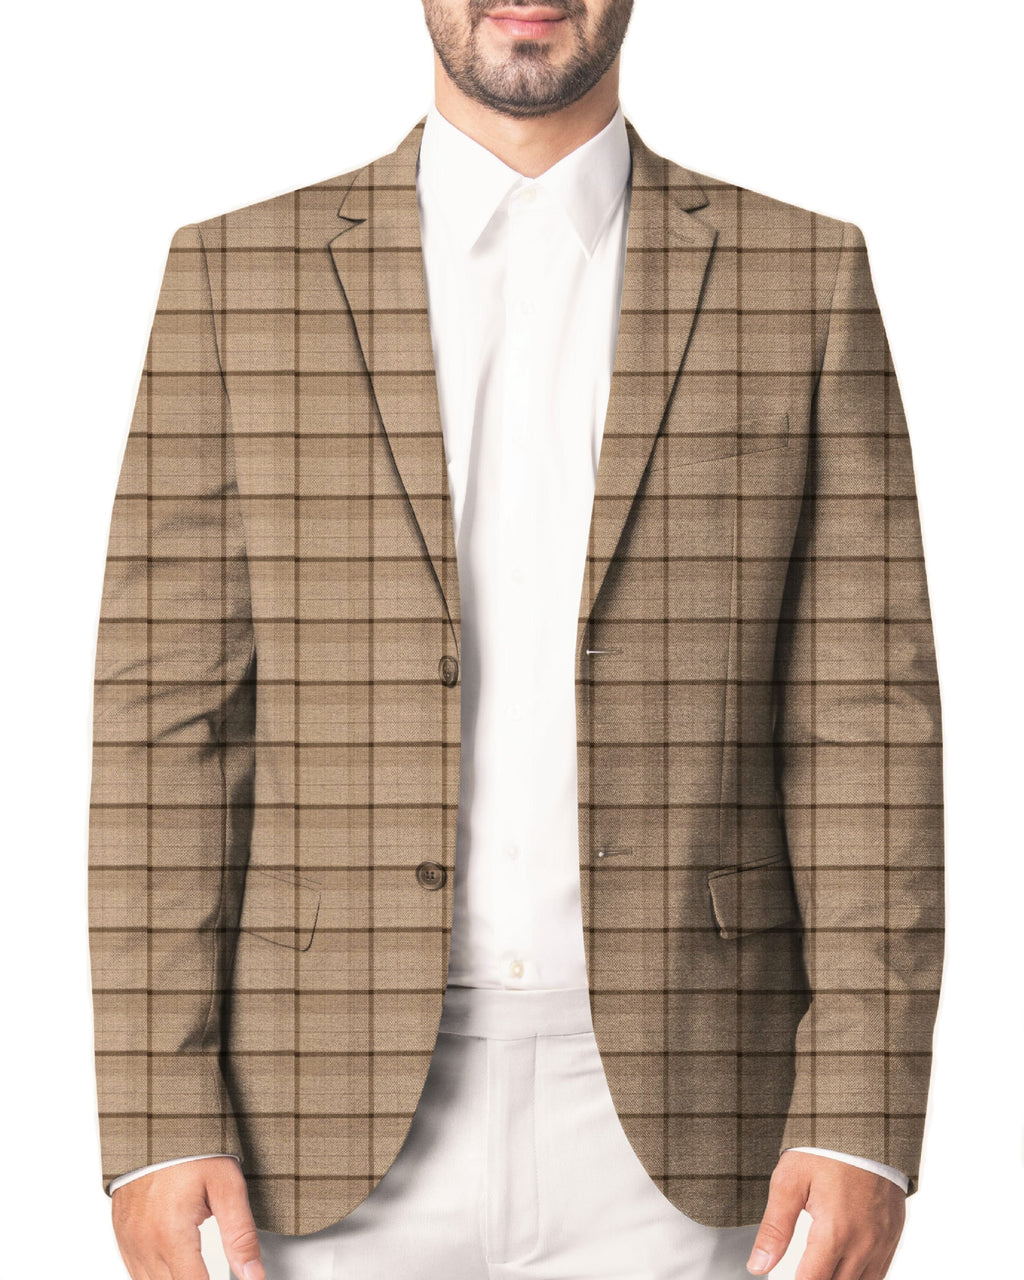 Varying Shades of Tan Checkered Suit - III